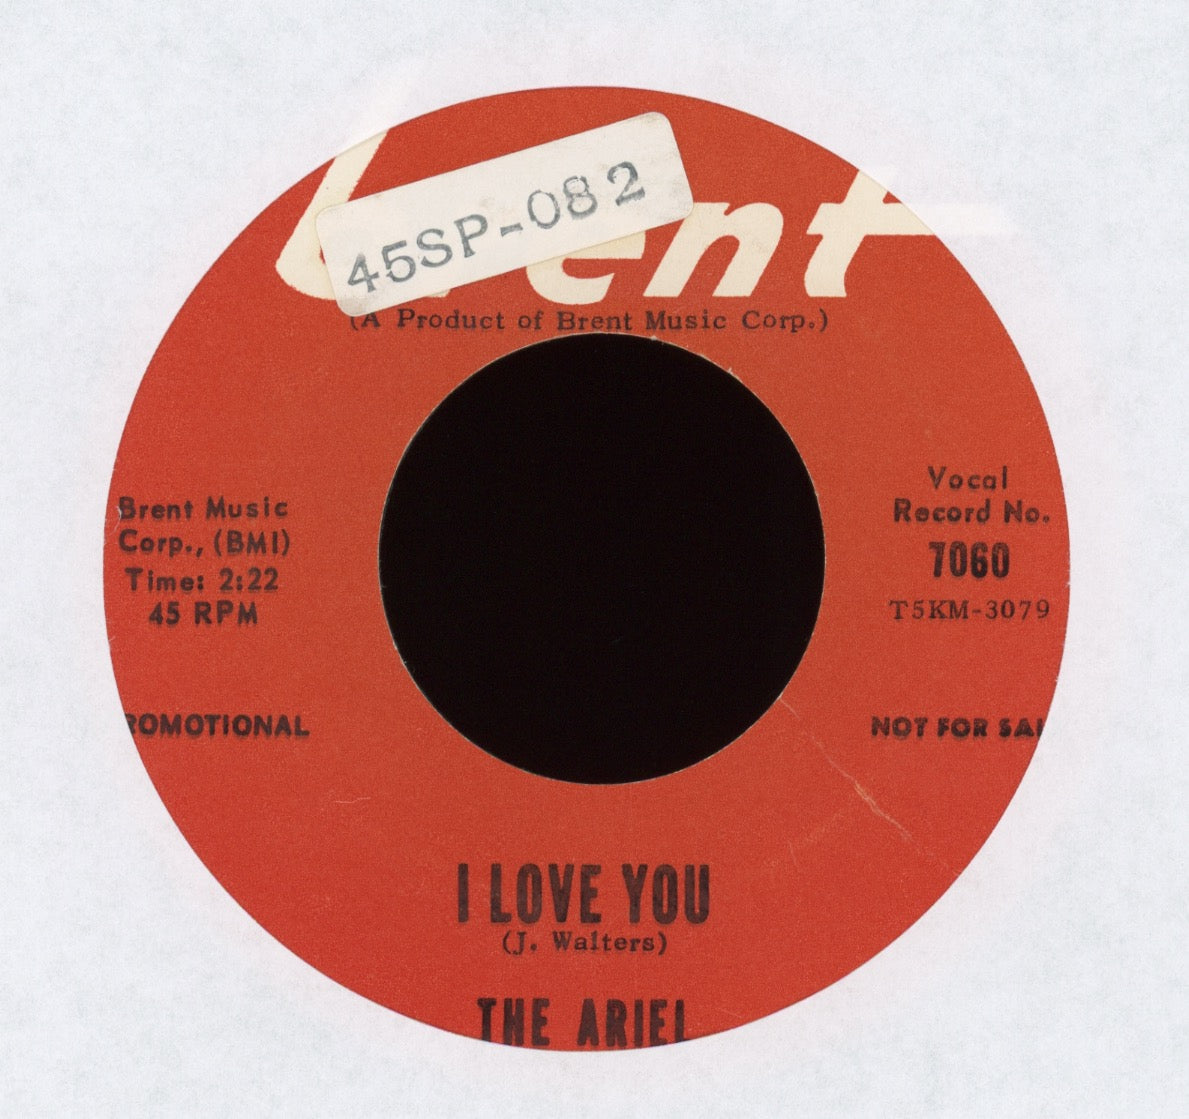 The Ariel - I Love You on Brent Promo